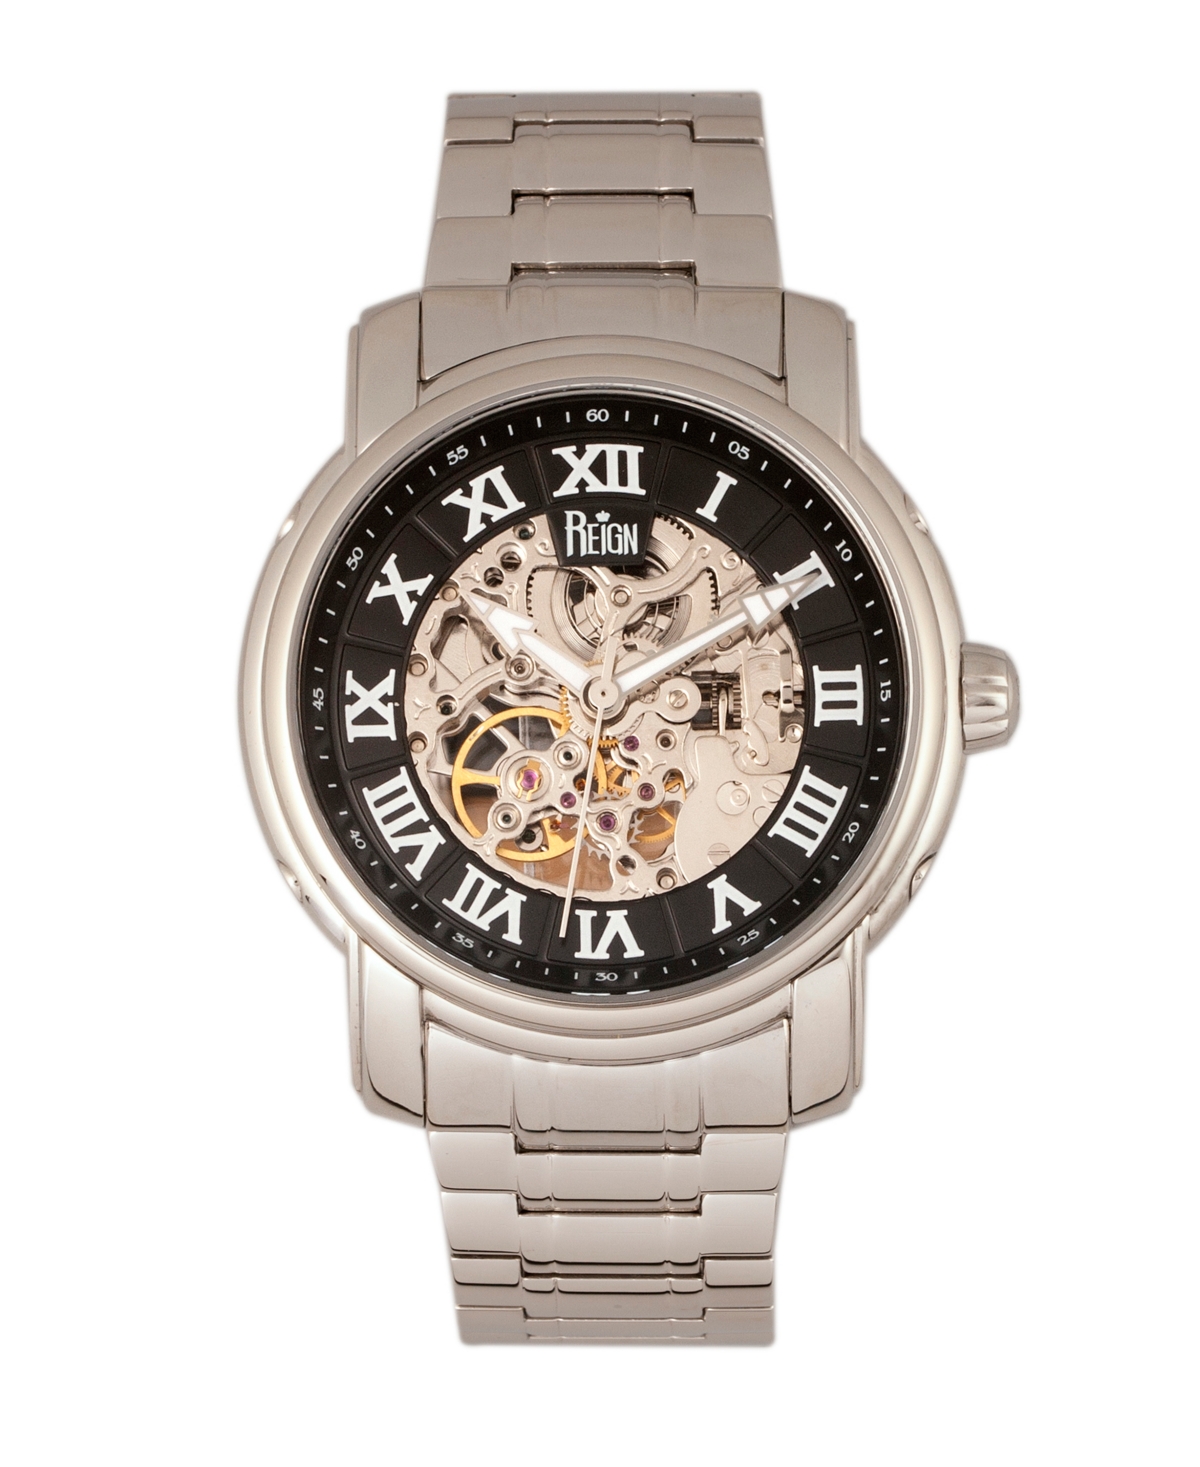 Kahn Automatic Black Dial, Skeleton Silver Stainless Steel Watch 45mm - Silver